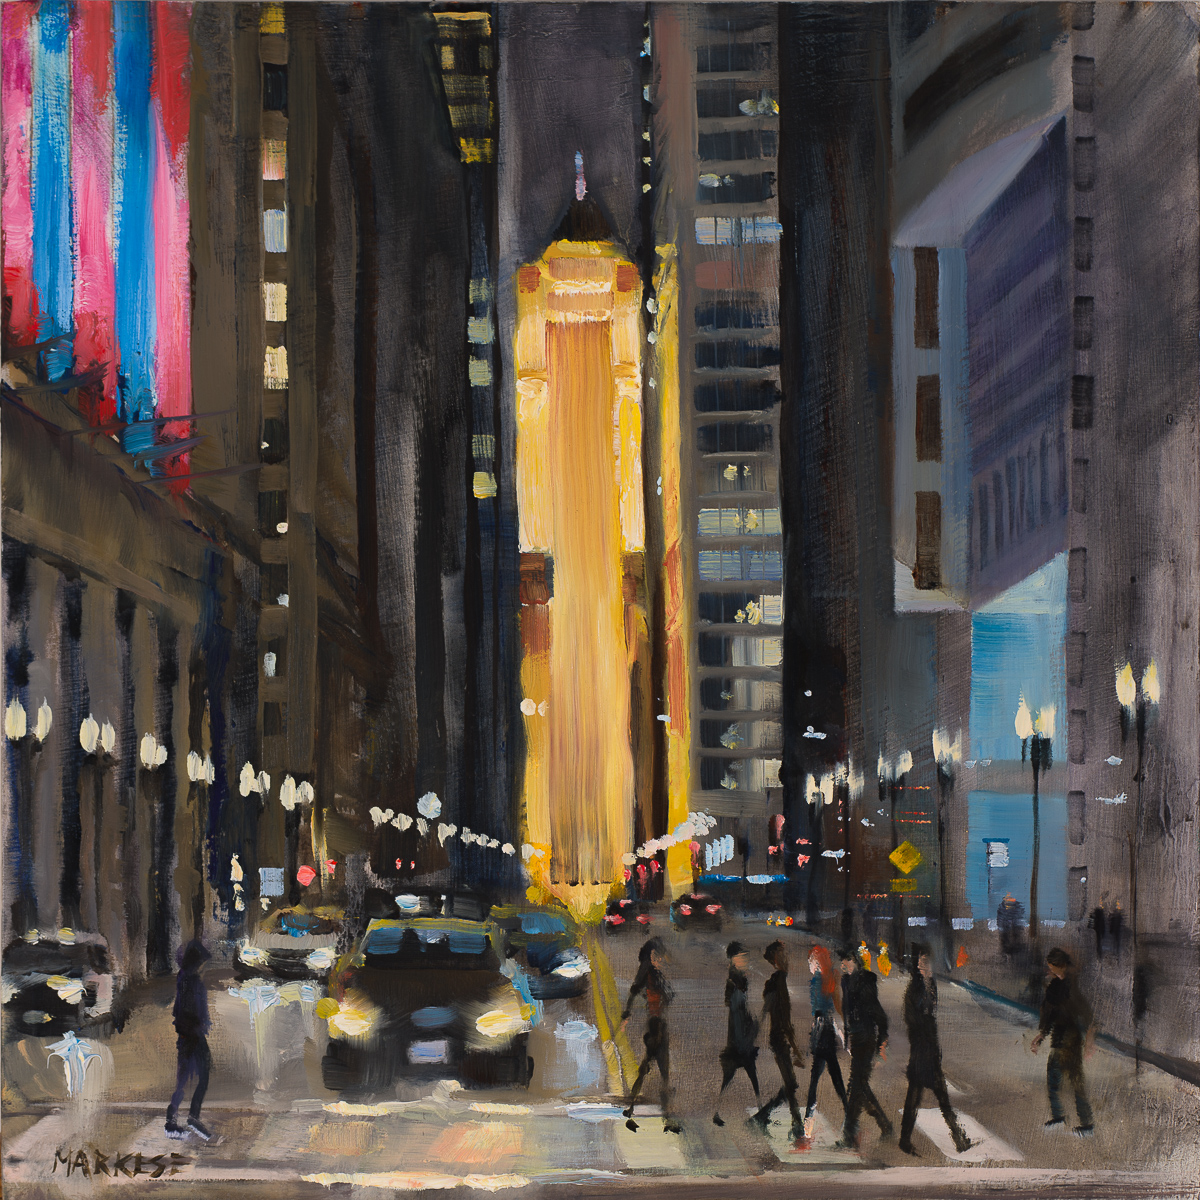 "LaSalle Street Canyon" 12 in x 12 in oil on panel, captures the vibrant energy of LaSalle St in Chicago